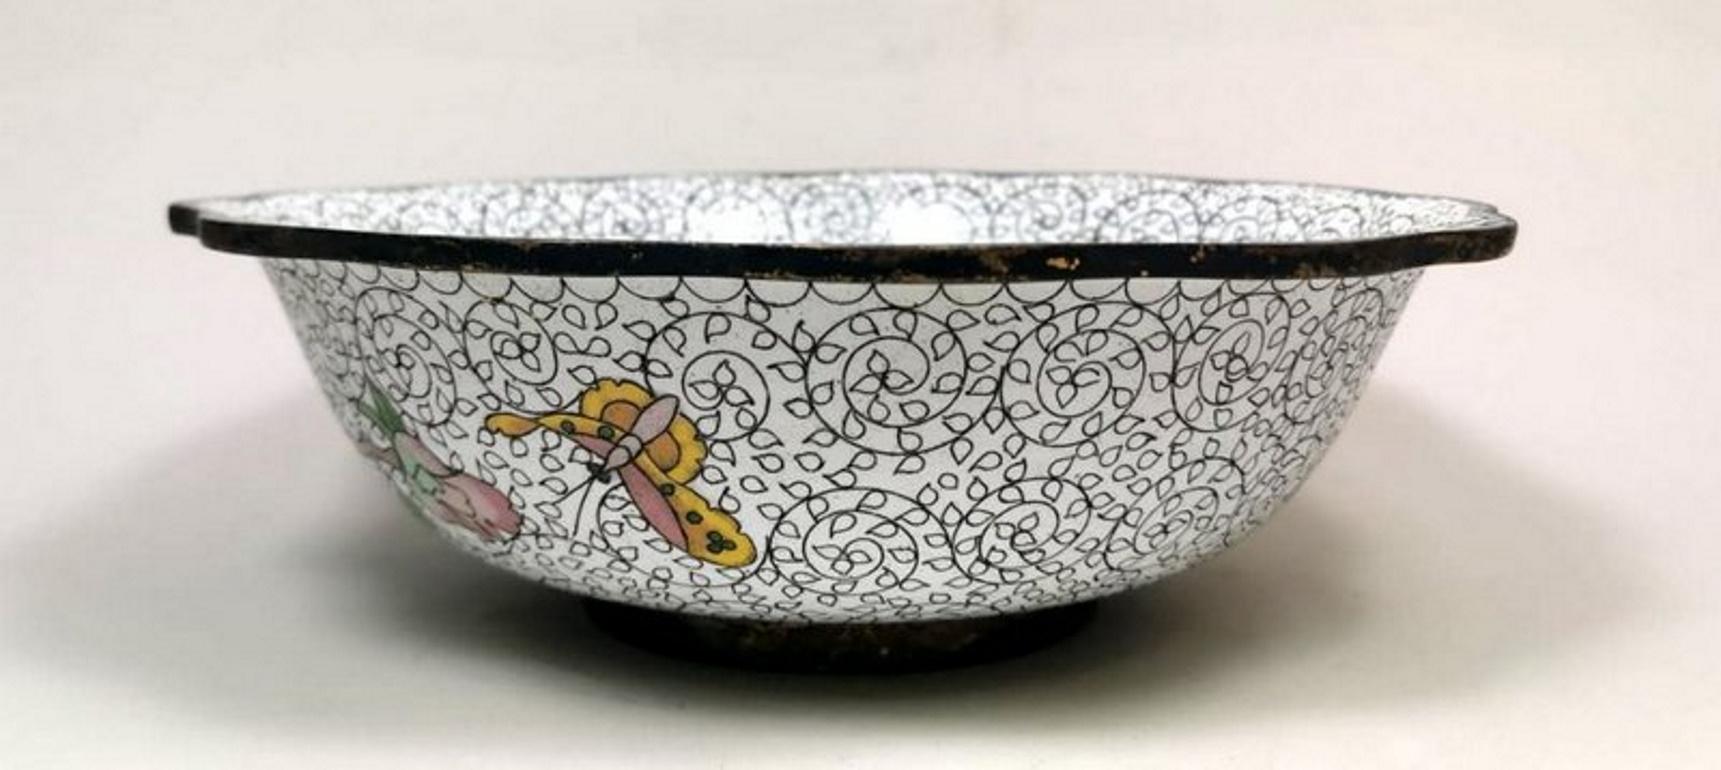 20th Century China Enameled Cloisonné Bowl with Blue and Yellow Peonies 